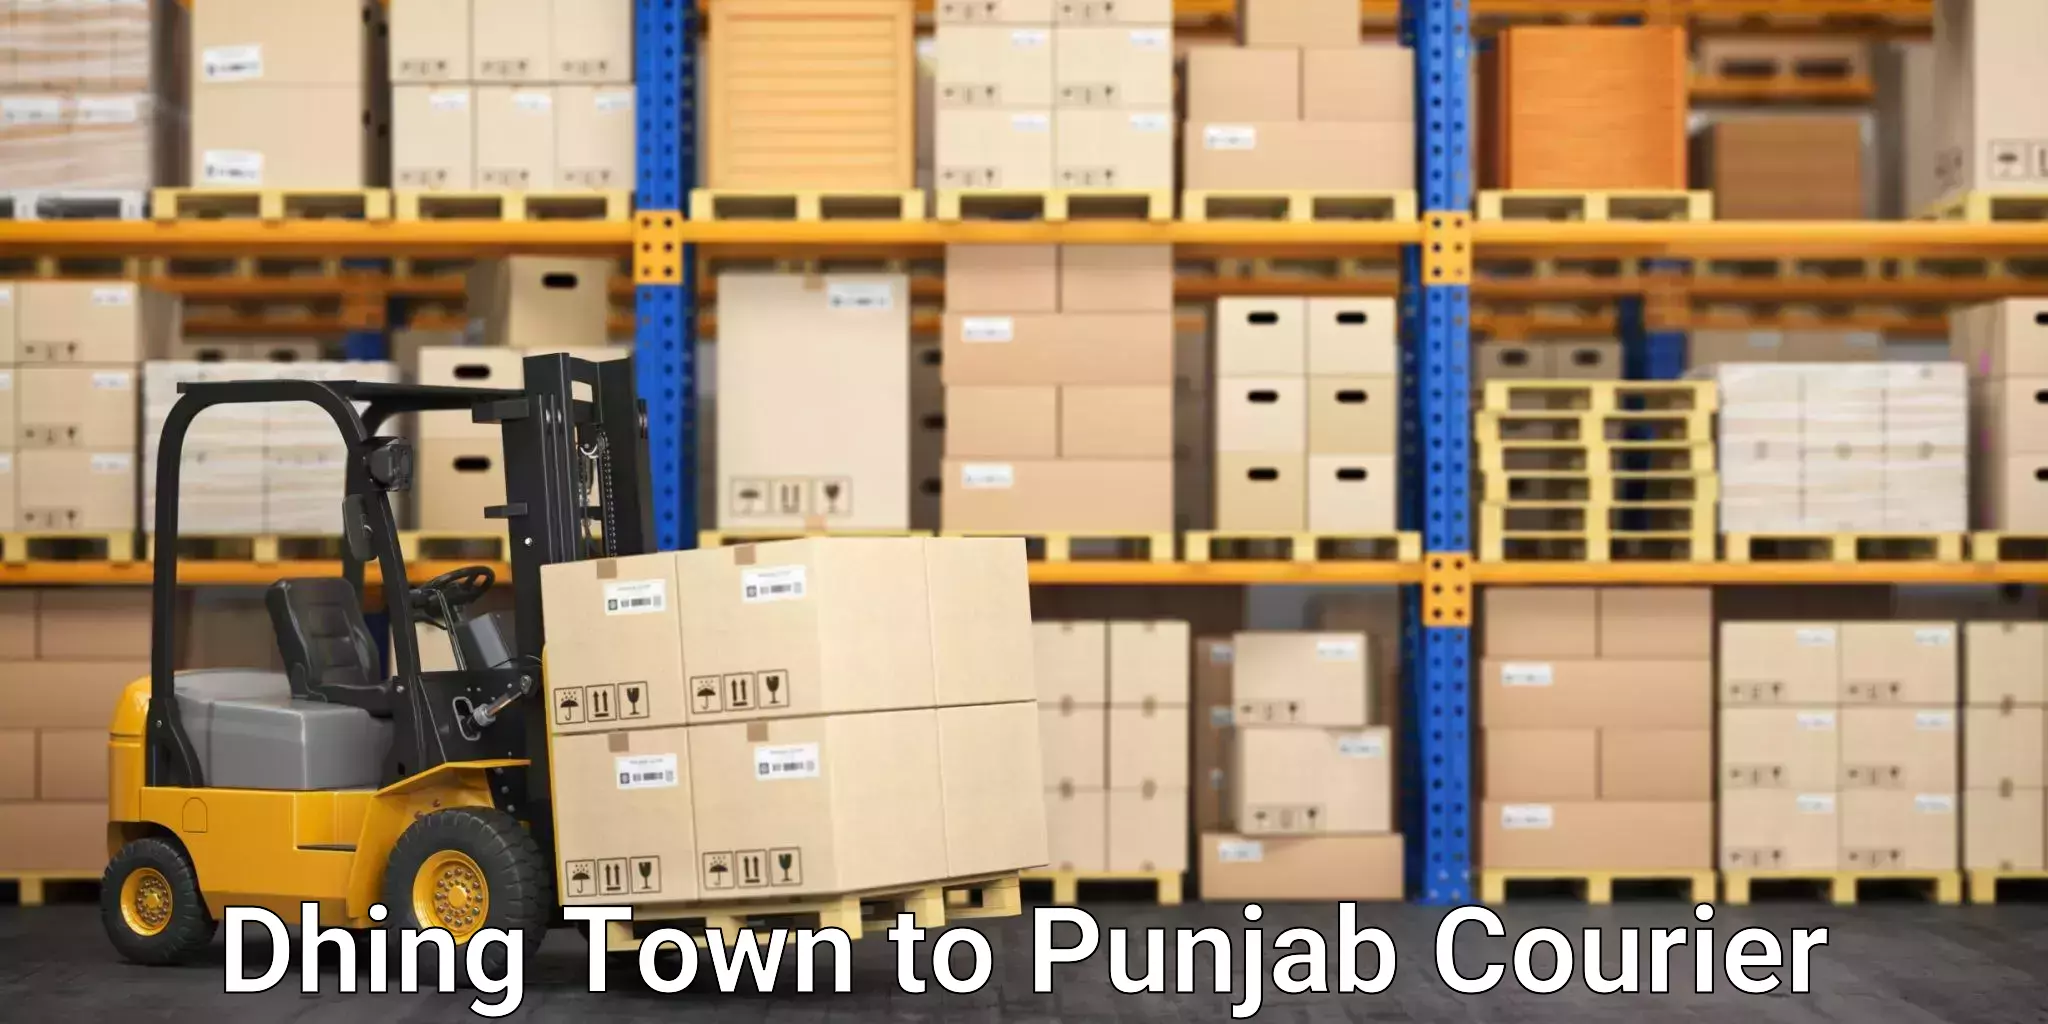 Courier service comparison Dhing Town to Punjab